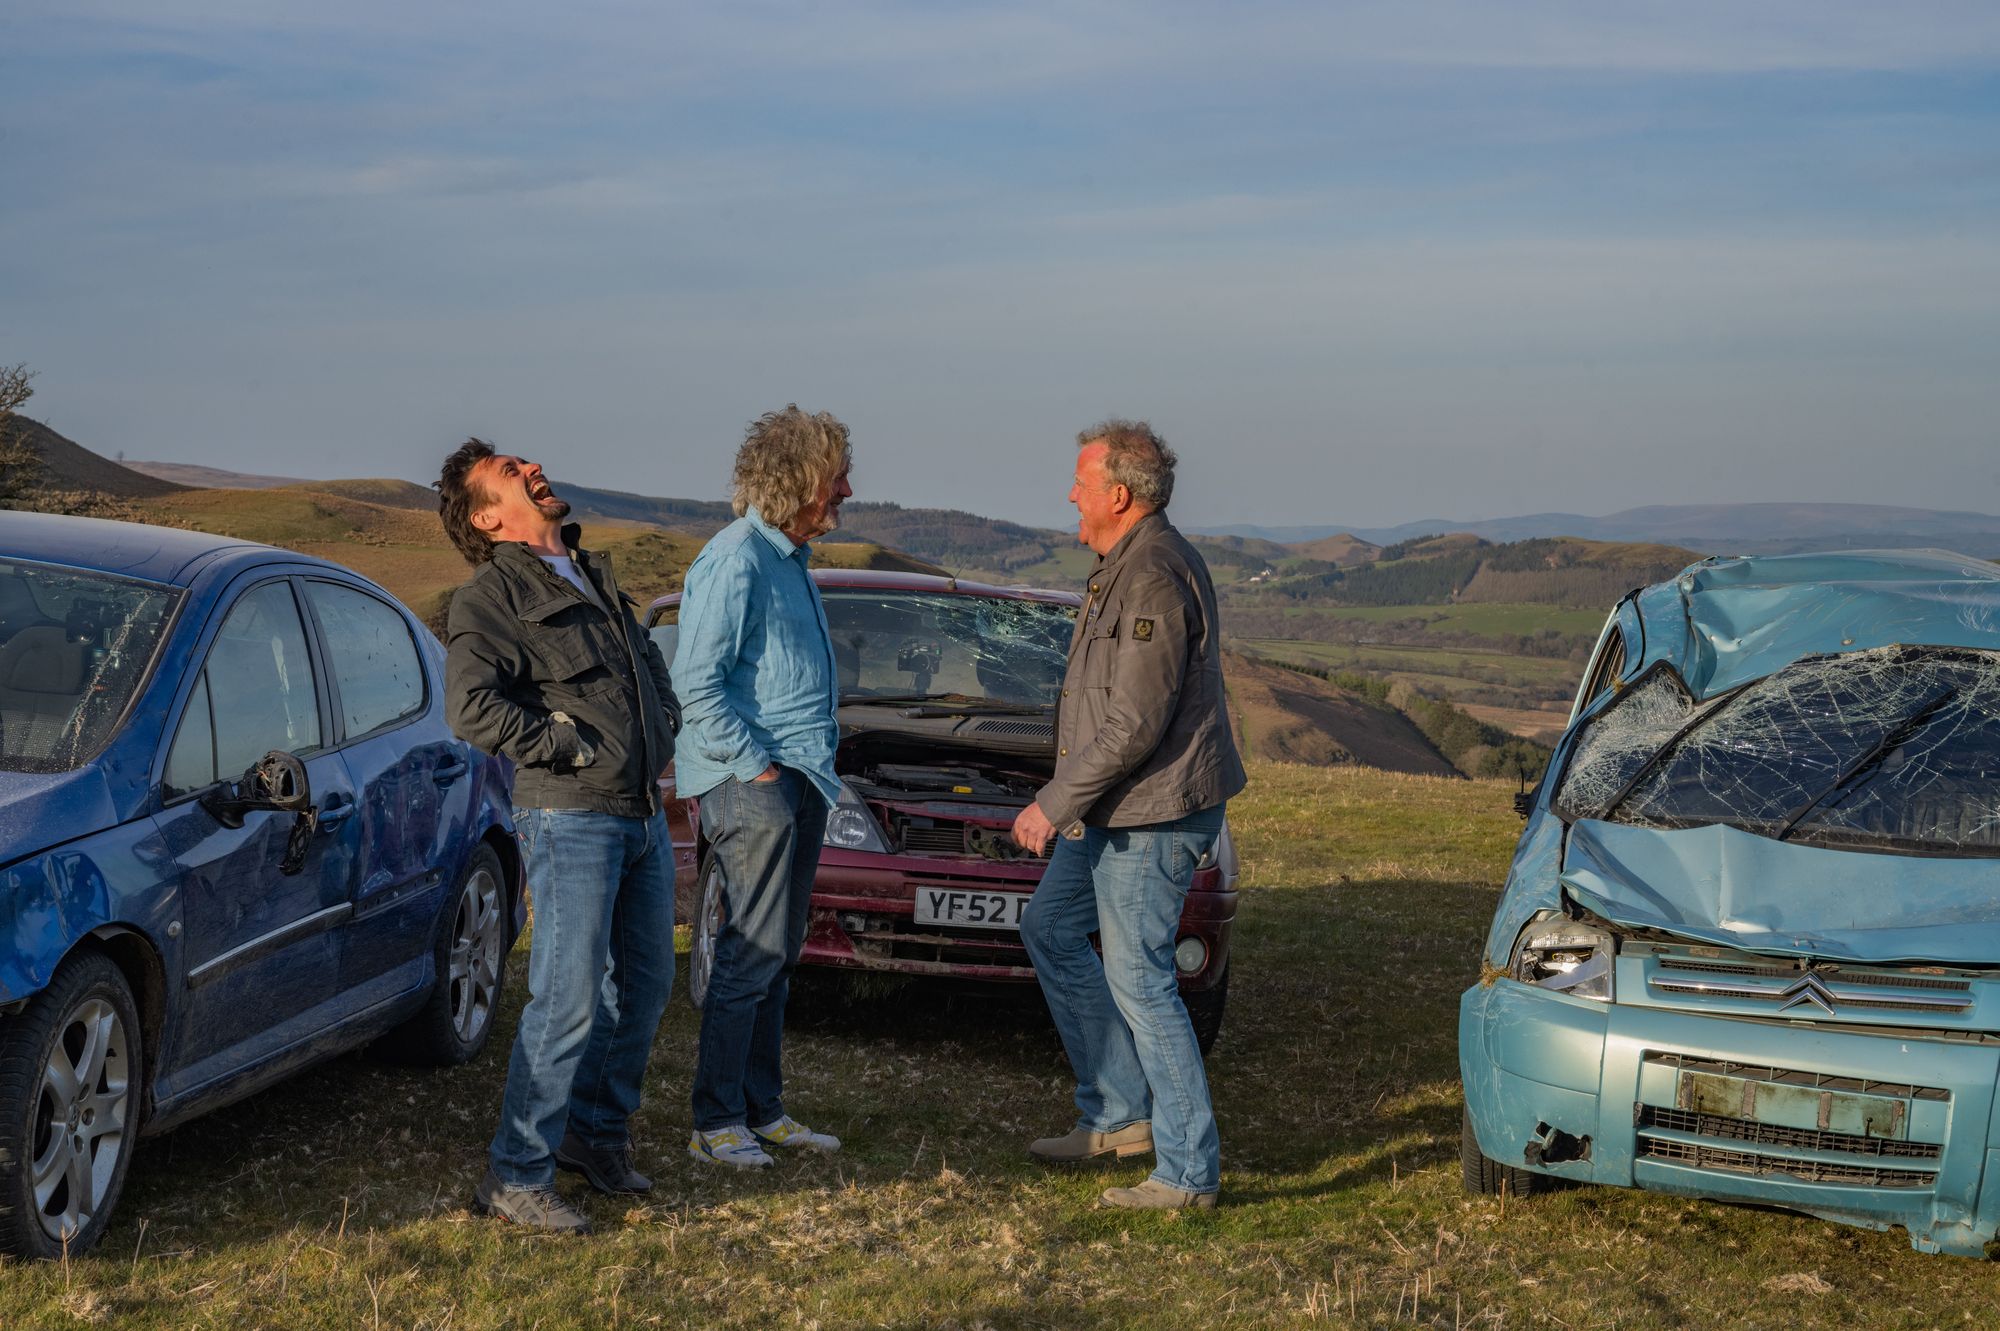 James May: Carnage A Trois - The Grand Tour